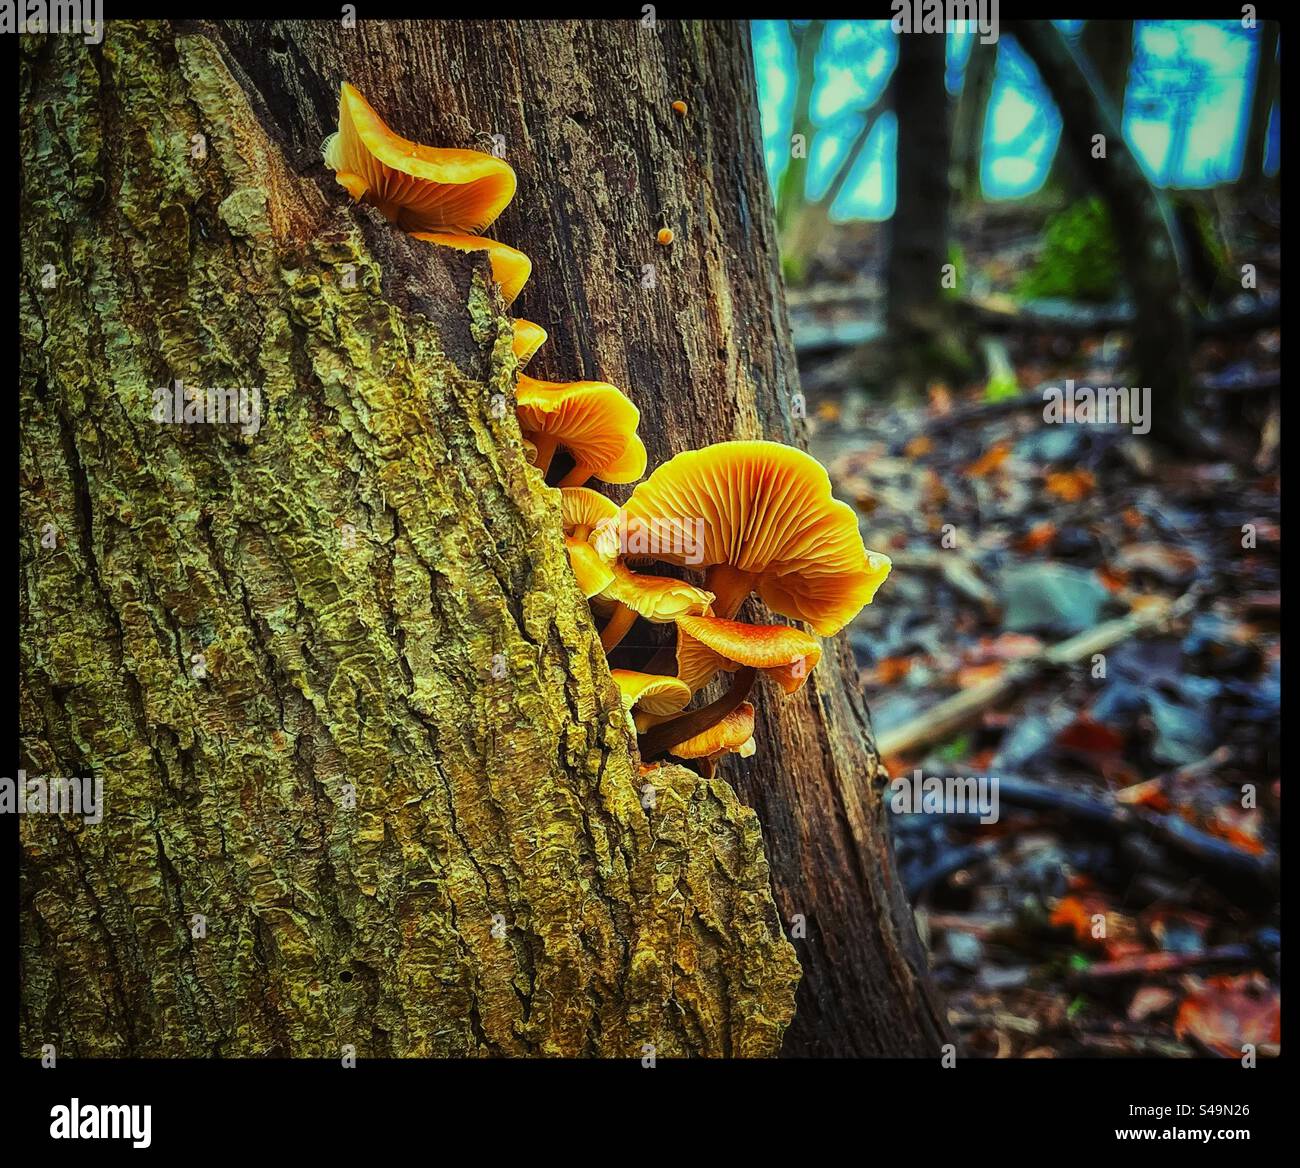 Fungus growing on the side of a tree in a woodland. Stock Photo